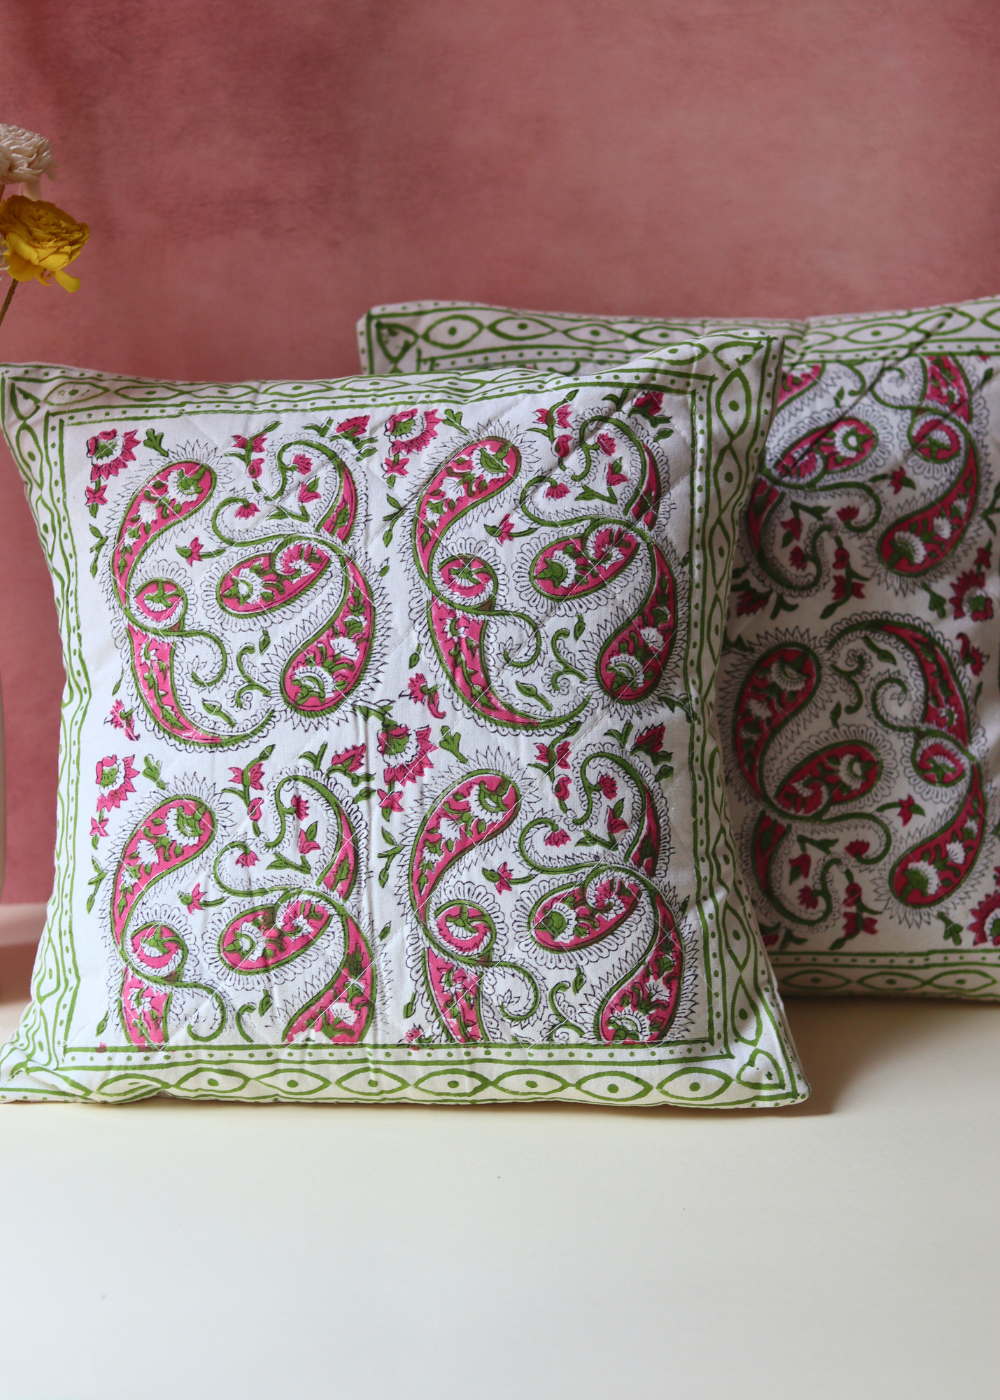 Green & maroon quilted block printed cushions 